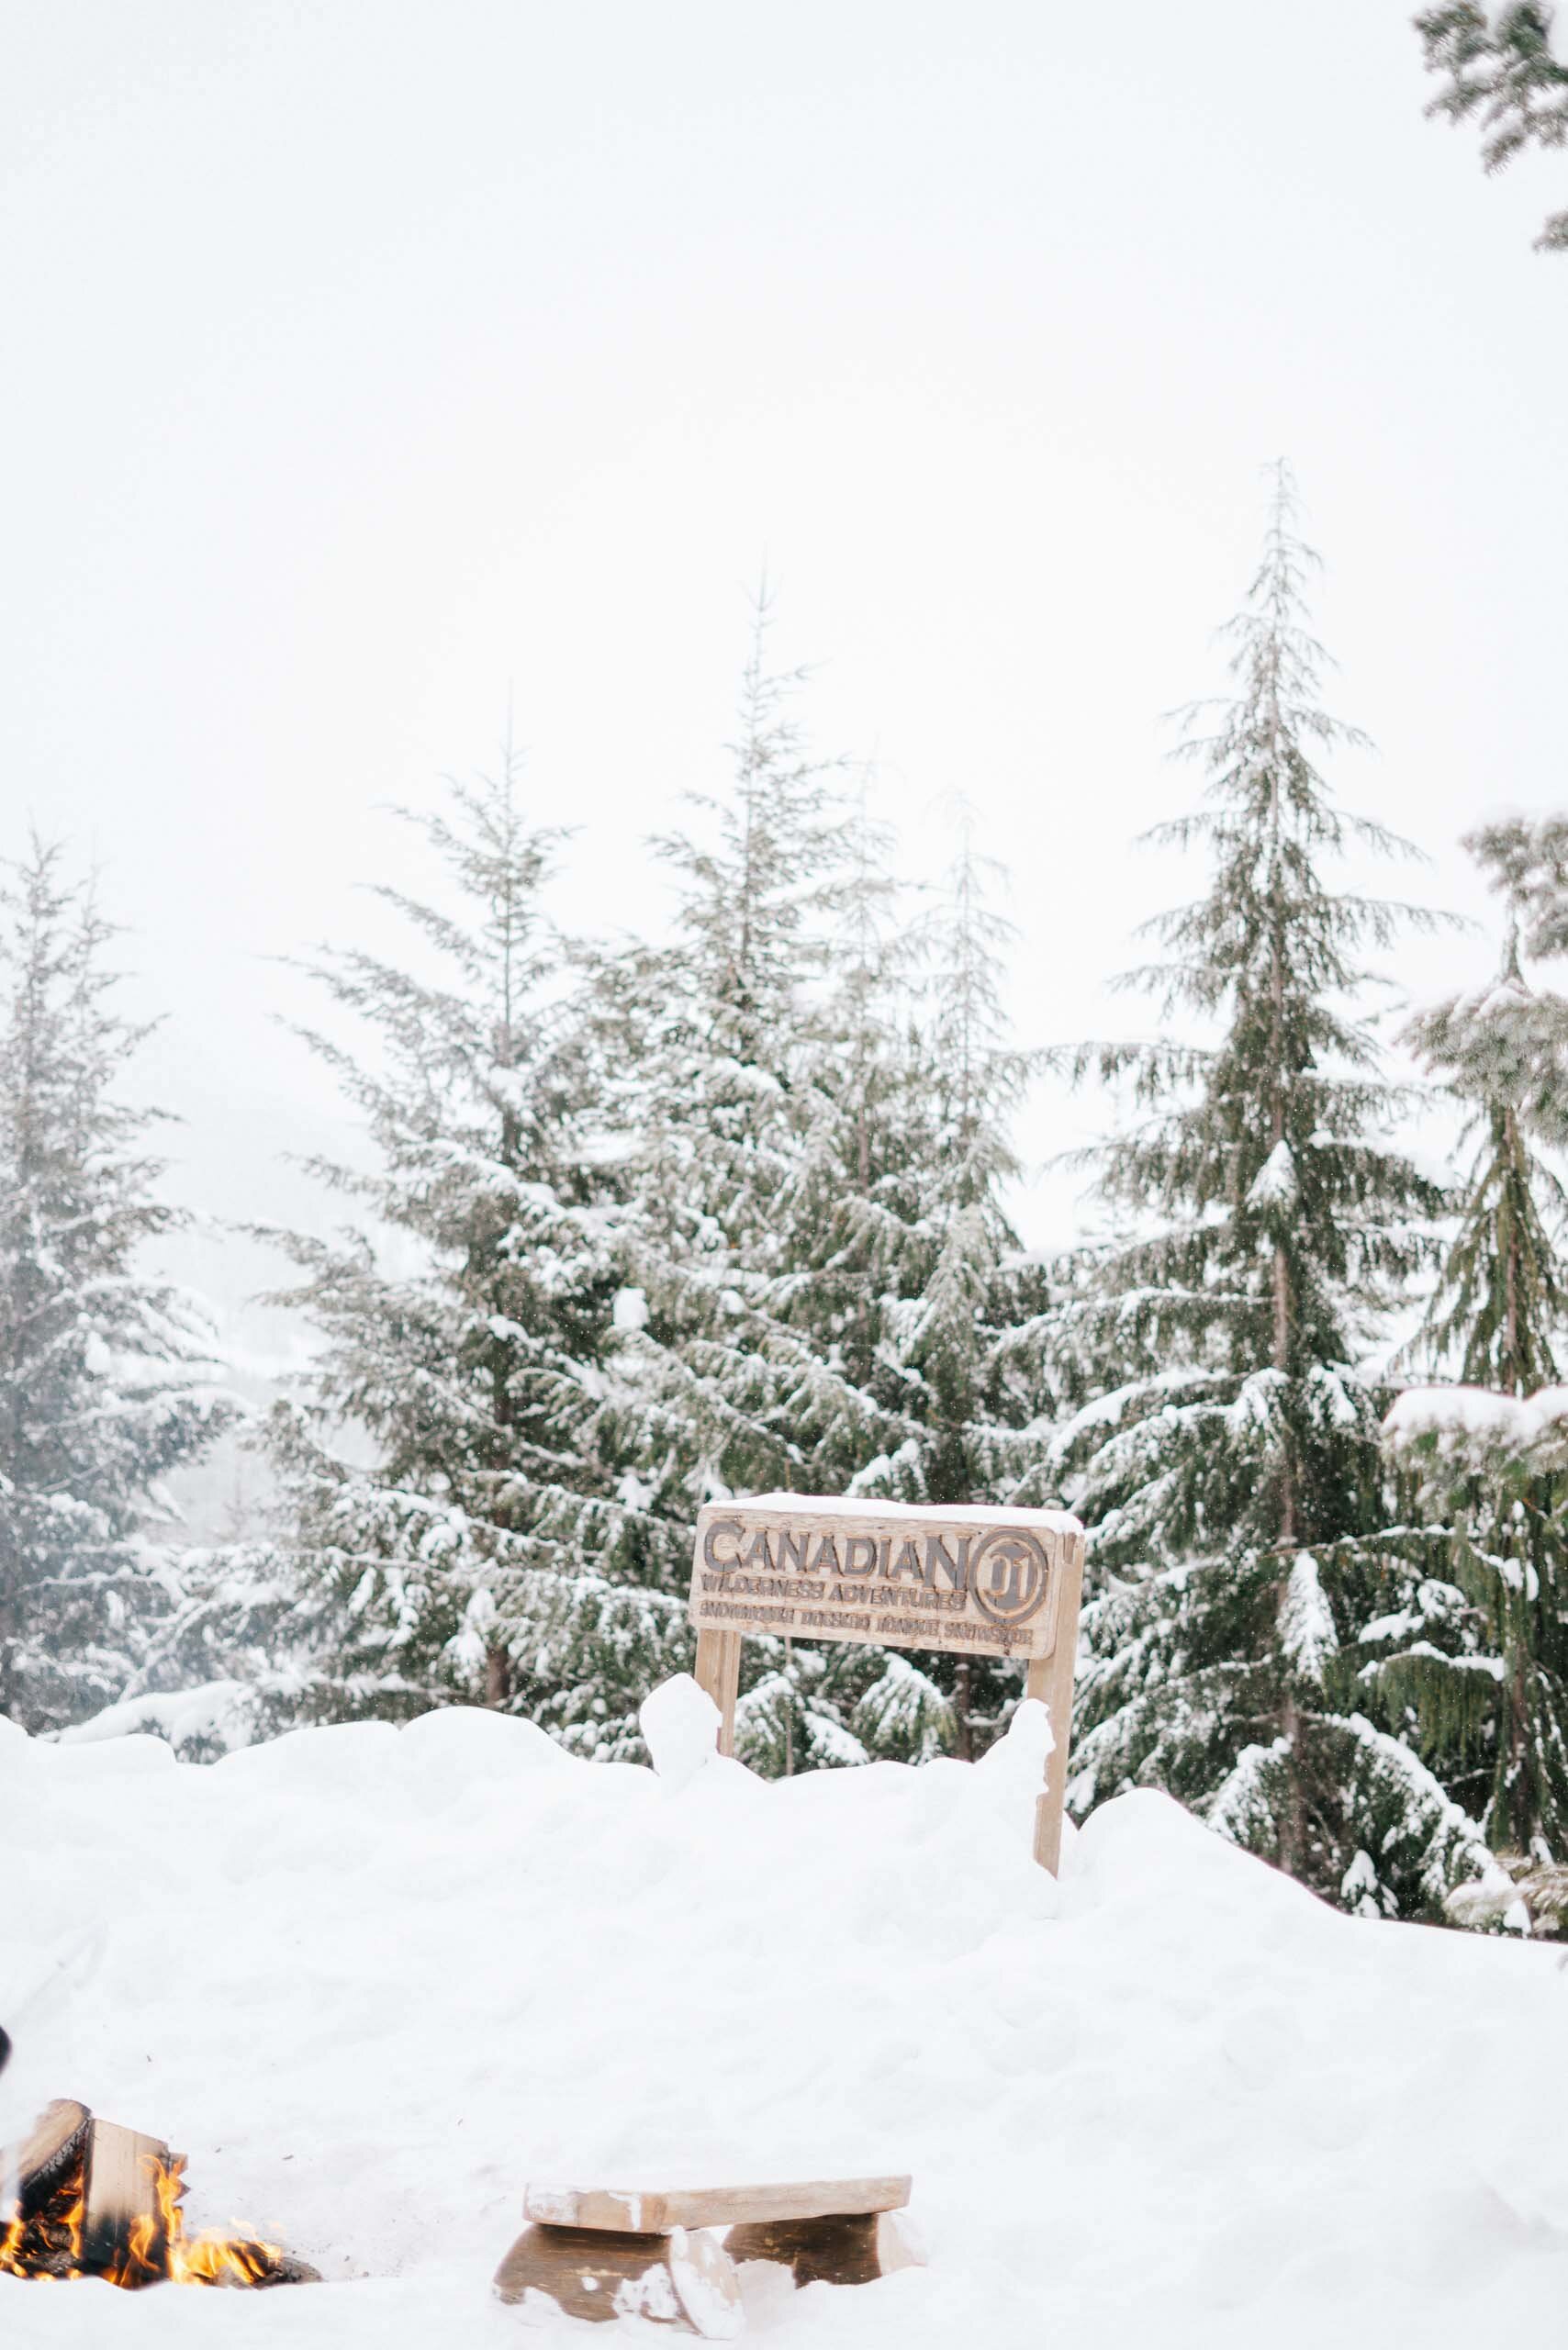 A snowy sign announces "Canadian wilderness adventures" next to snowy trees and a warm campfire. 